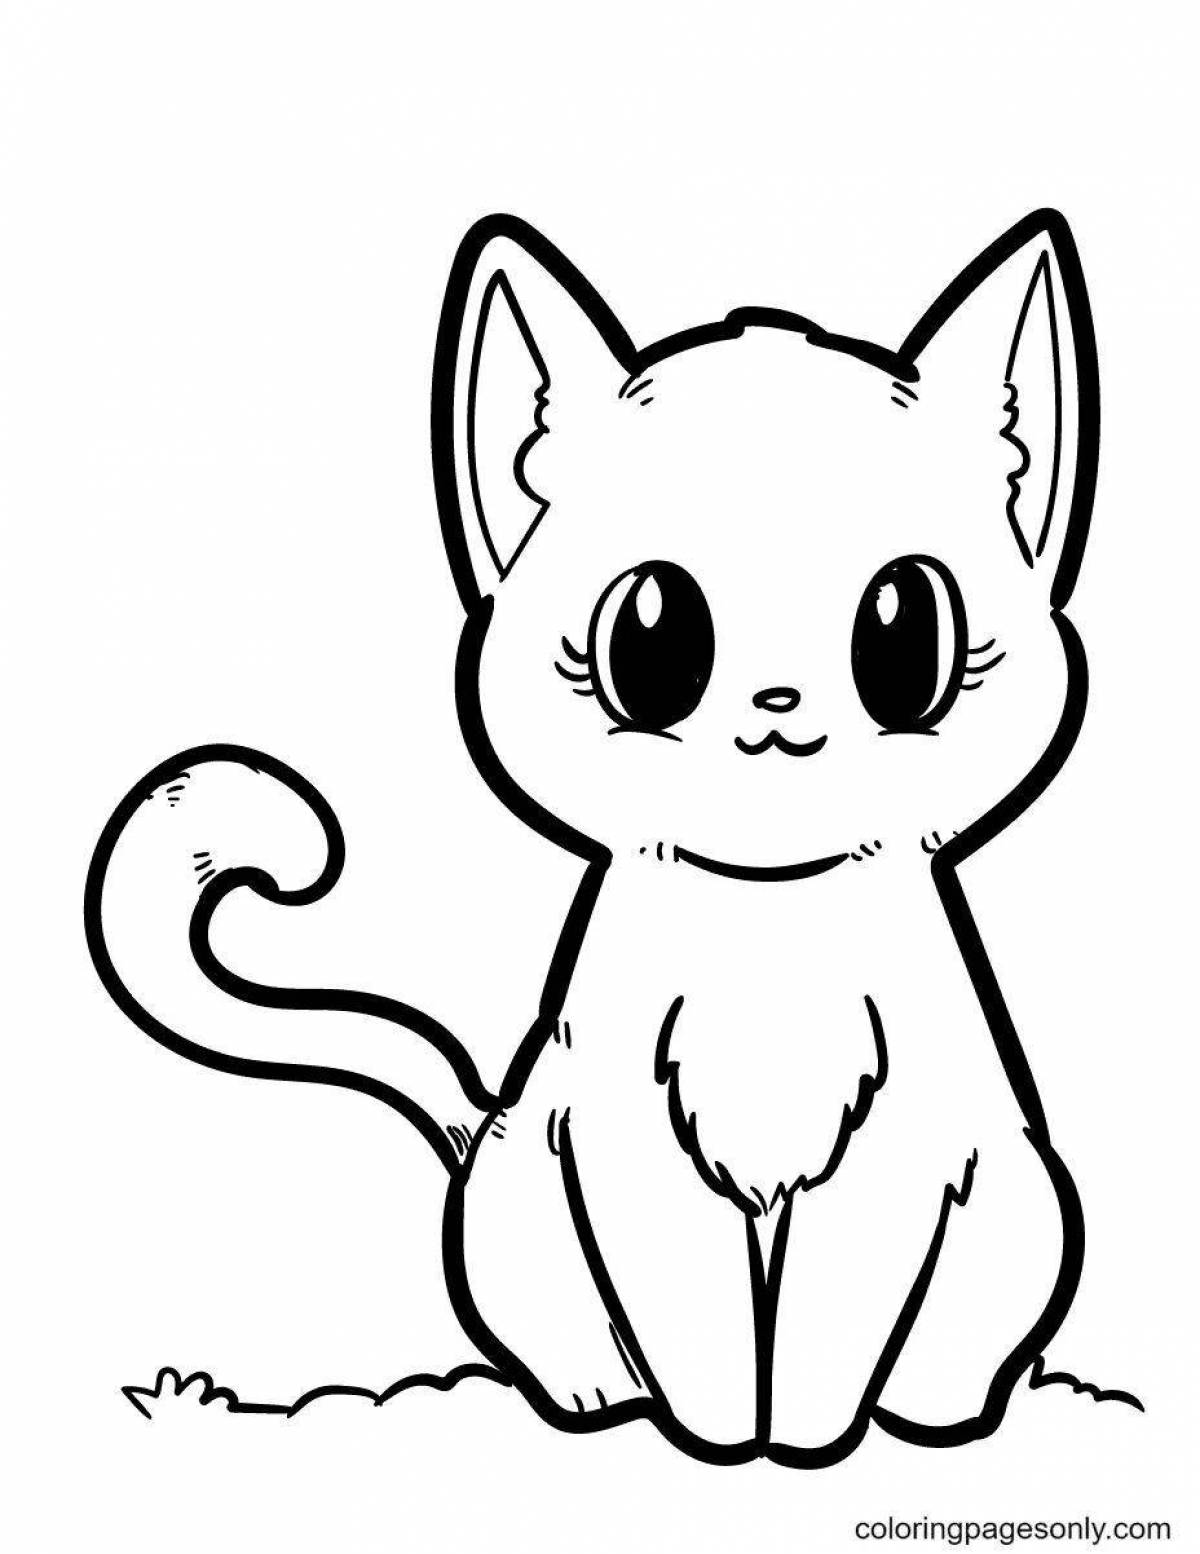 Fun coloring pages with cats